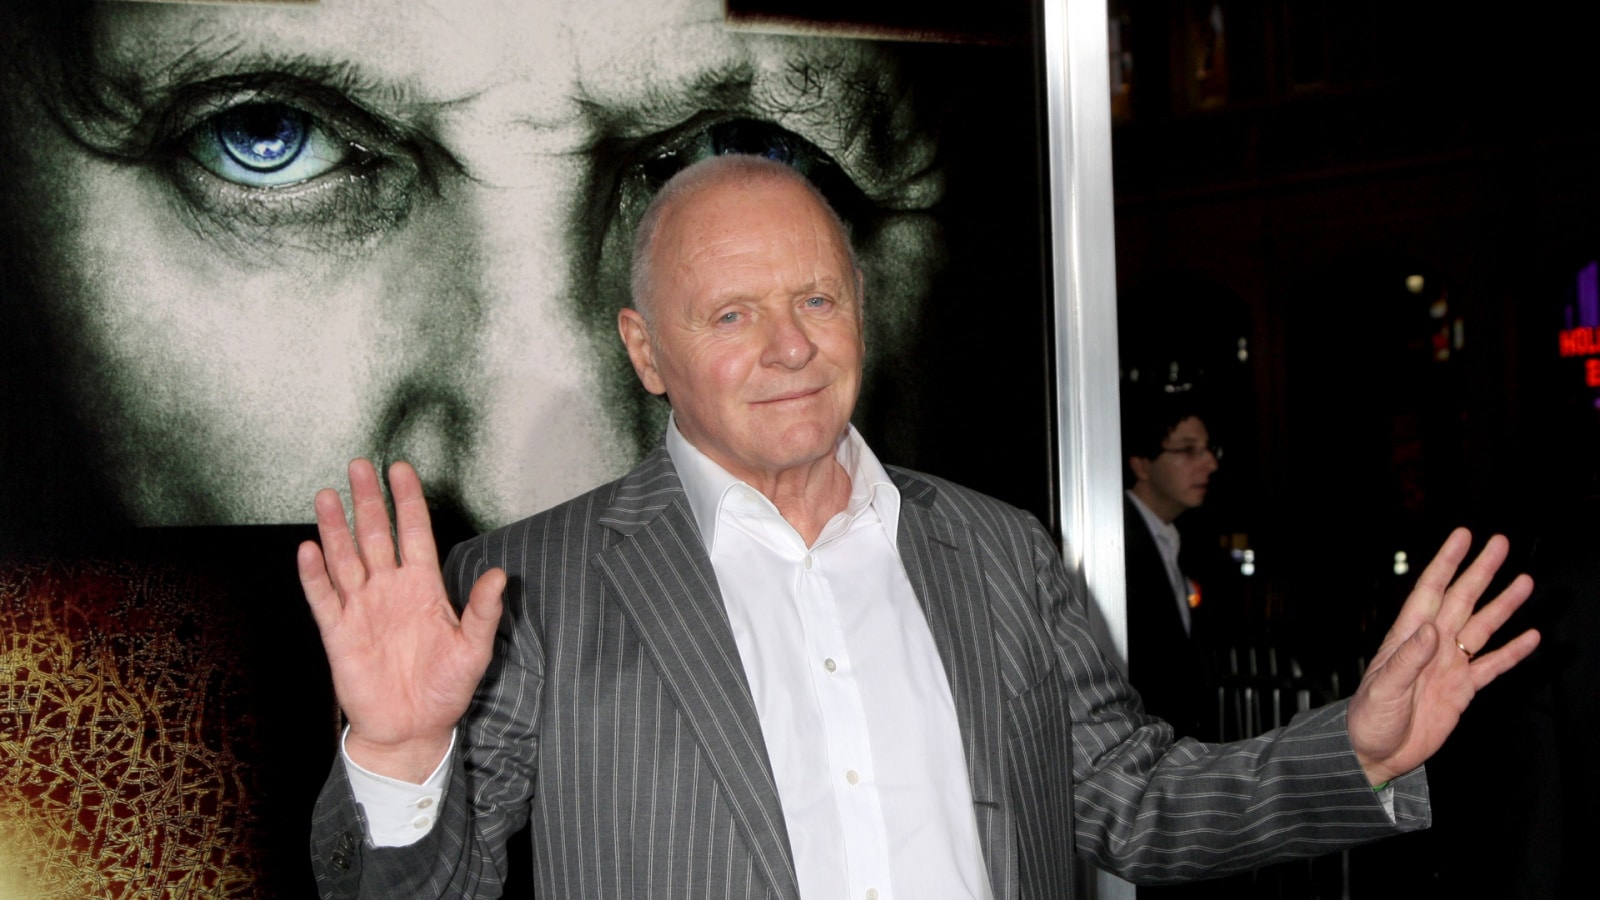 LOS ANGELES - JAN 26: Anthony Hopkins arrives at "The Rite" Premiere at Grauman's Chinese Theater on January 26, 2011 in Los Angeles, CA